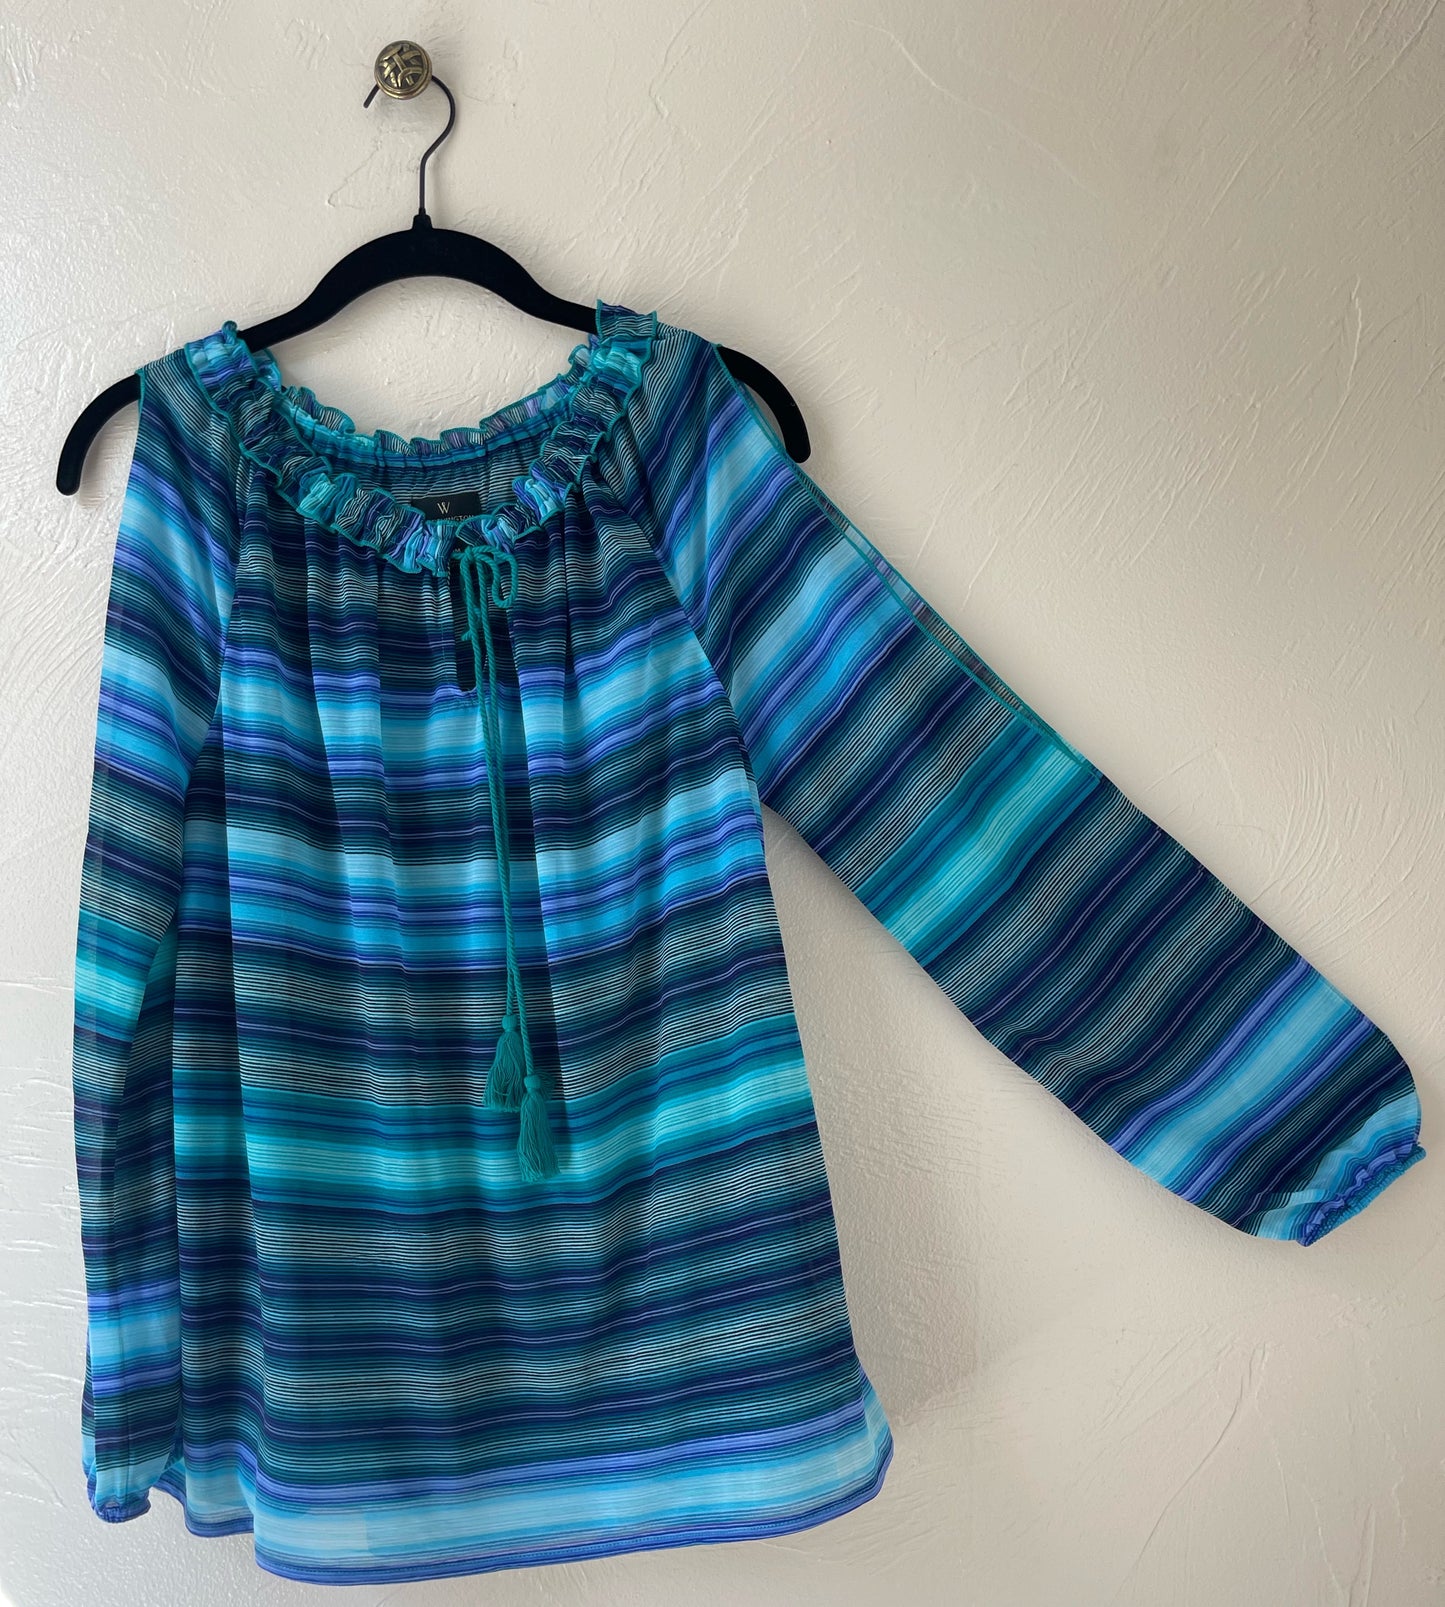 Multicolored Stripes Gypsy Style Shirt